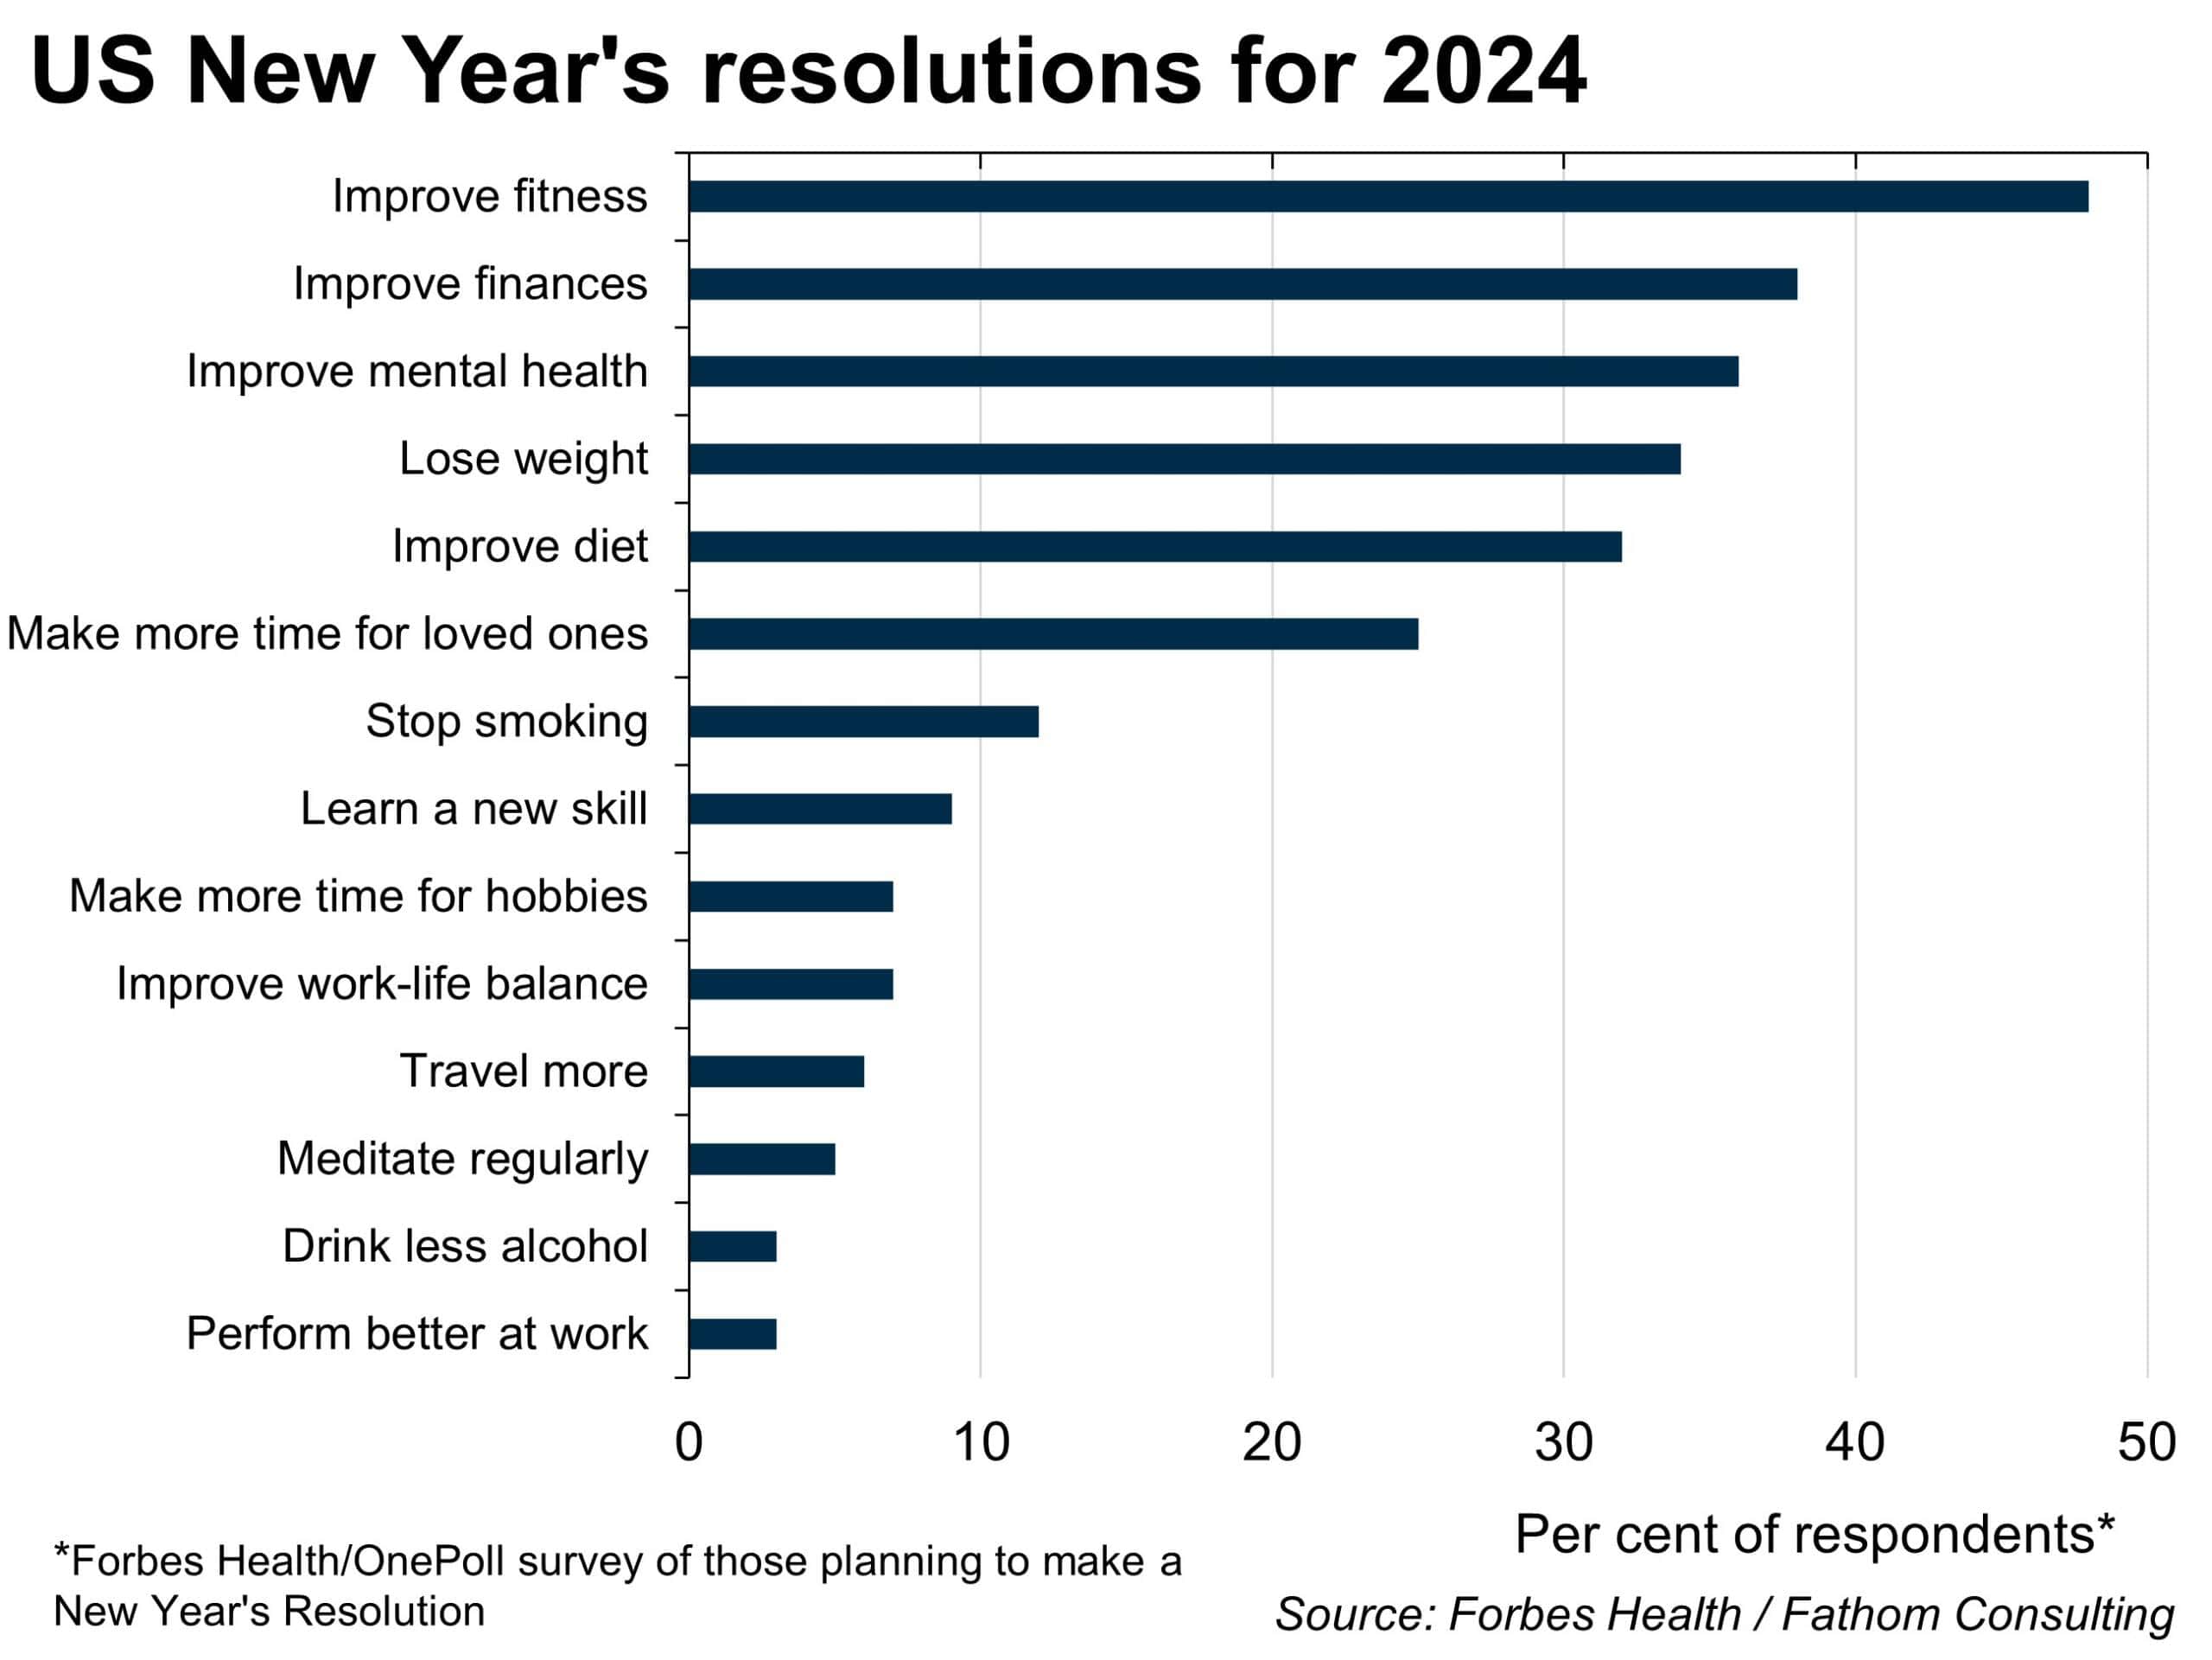 New Year's resolutions in the US